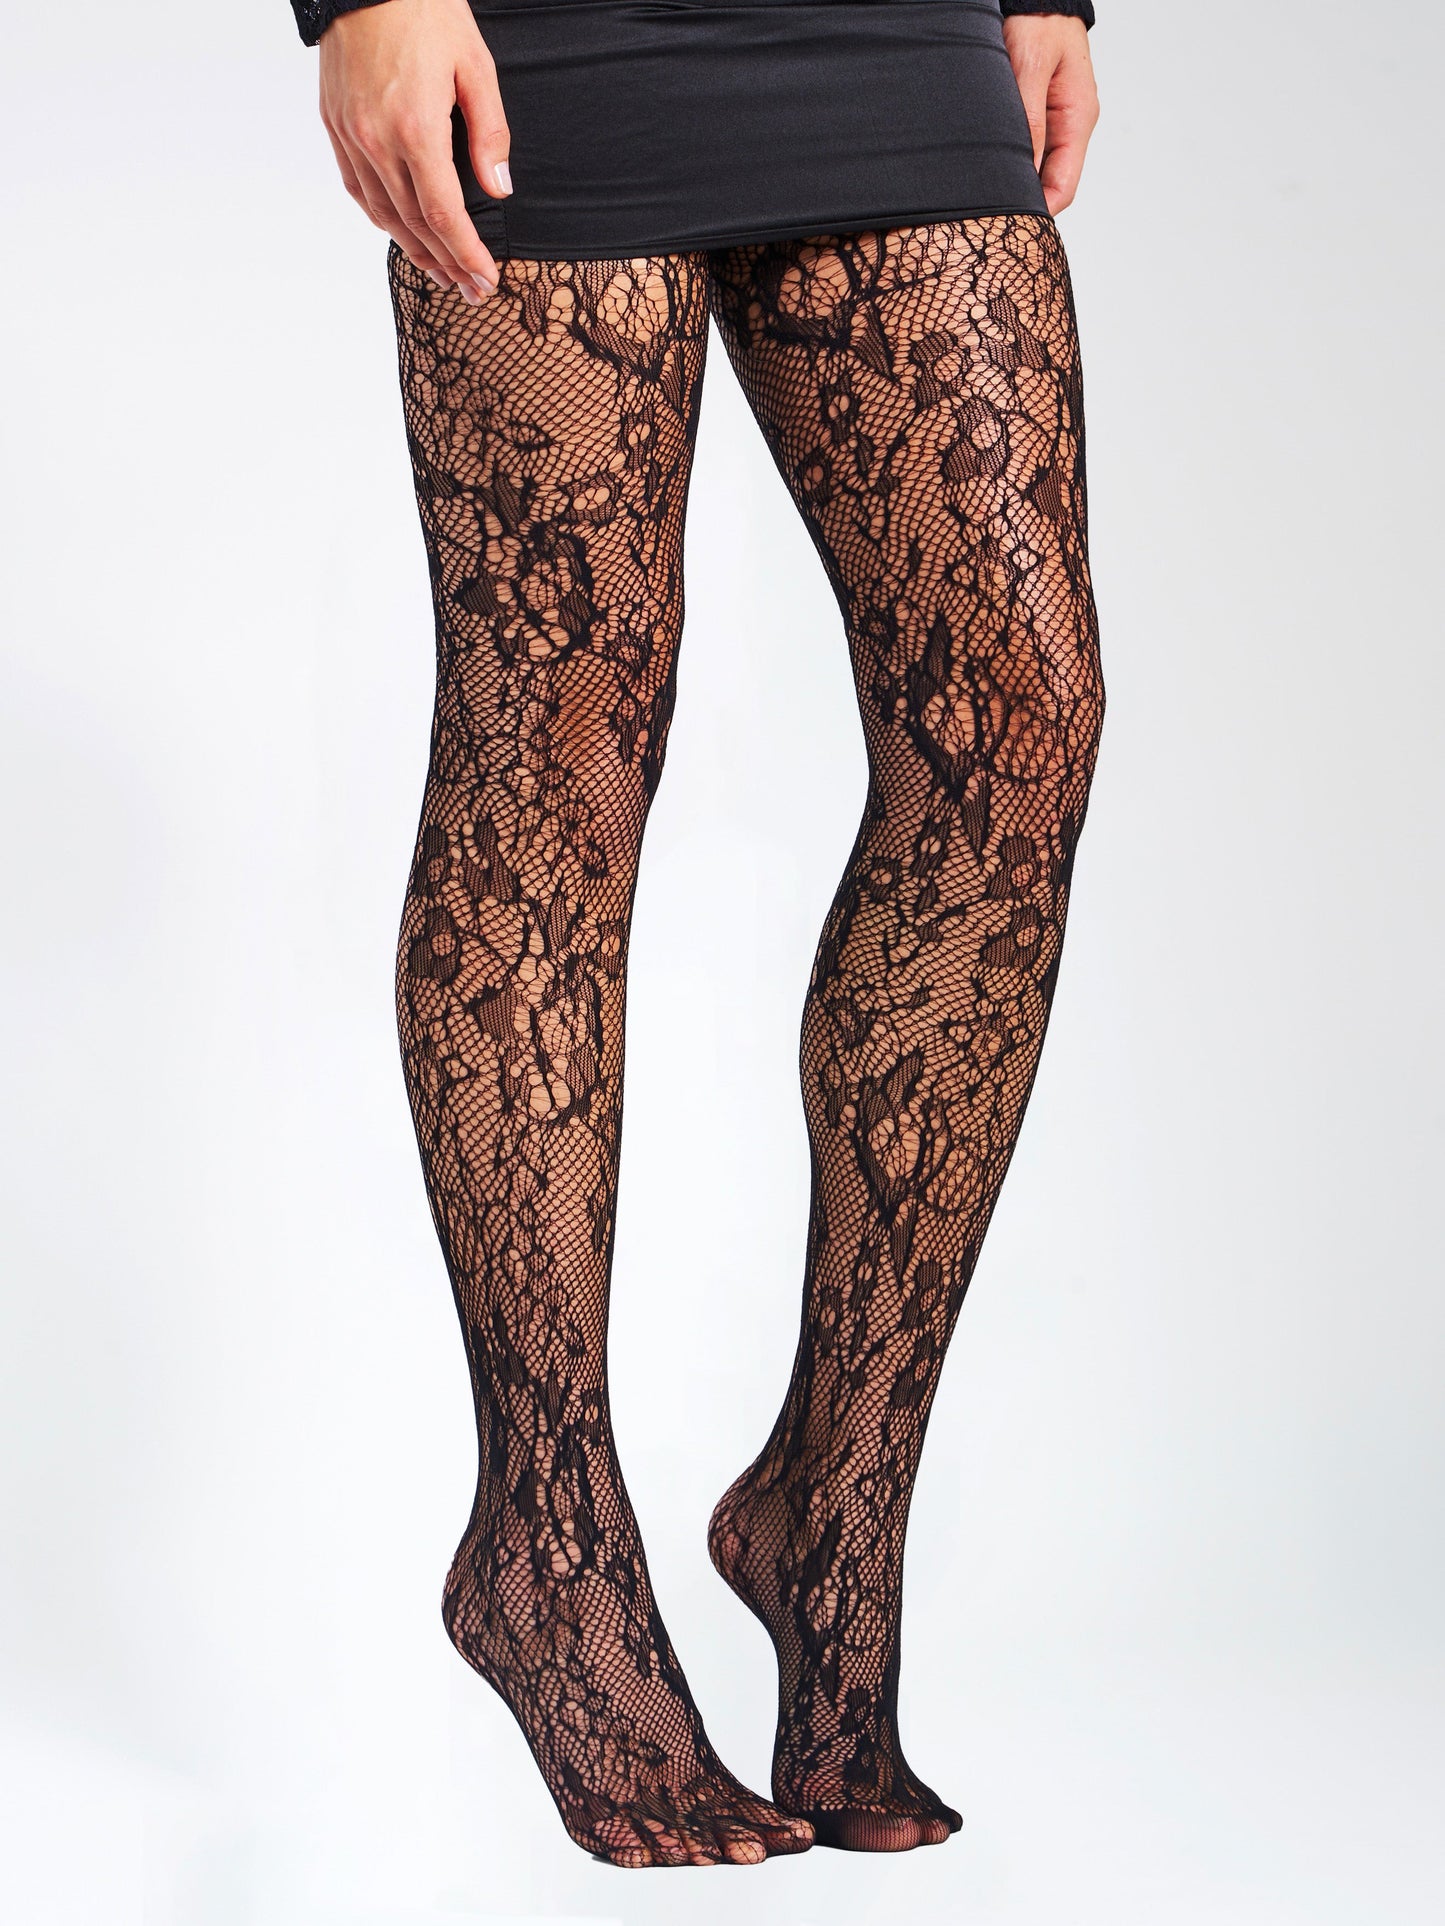 Lace tights